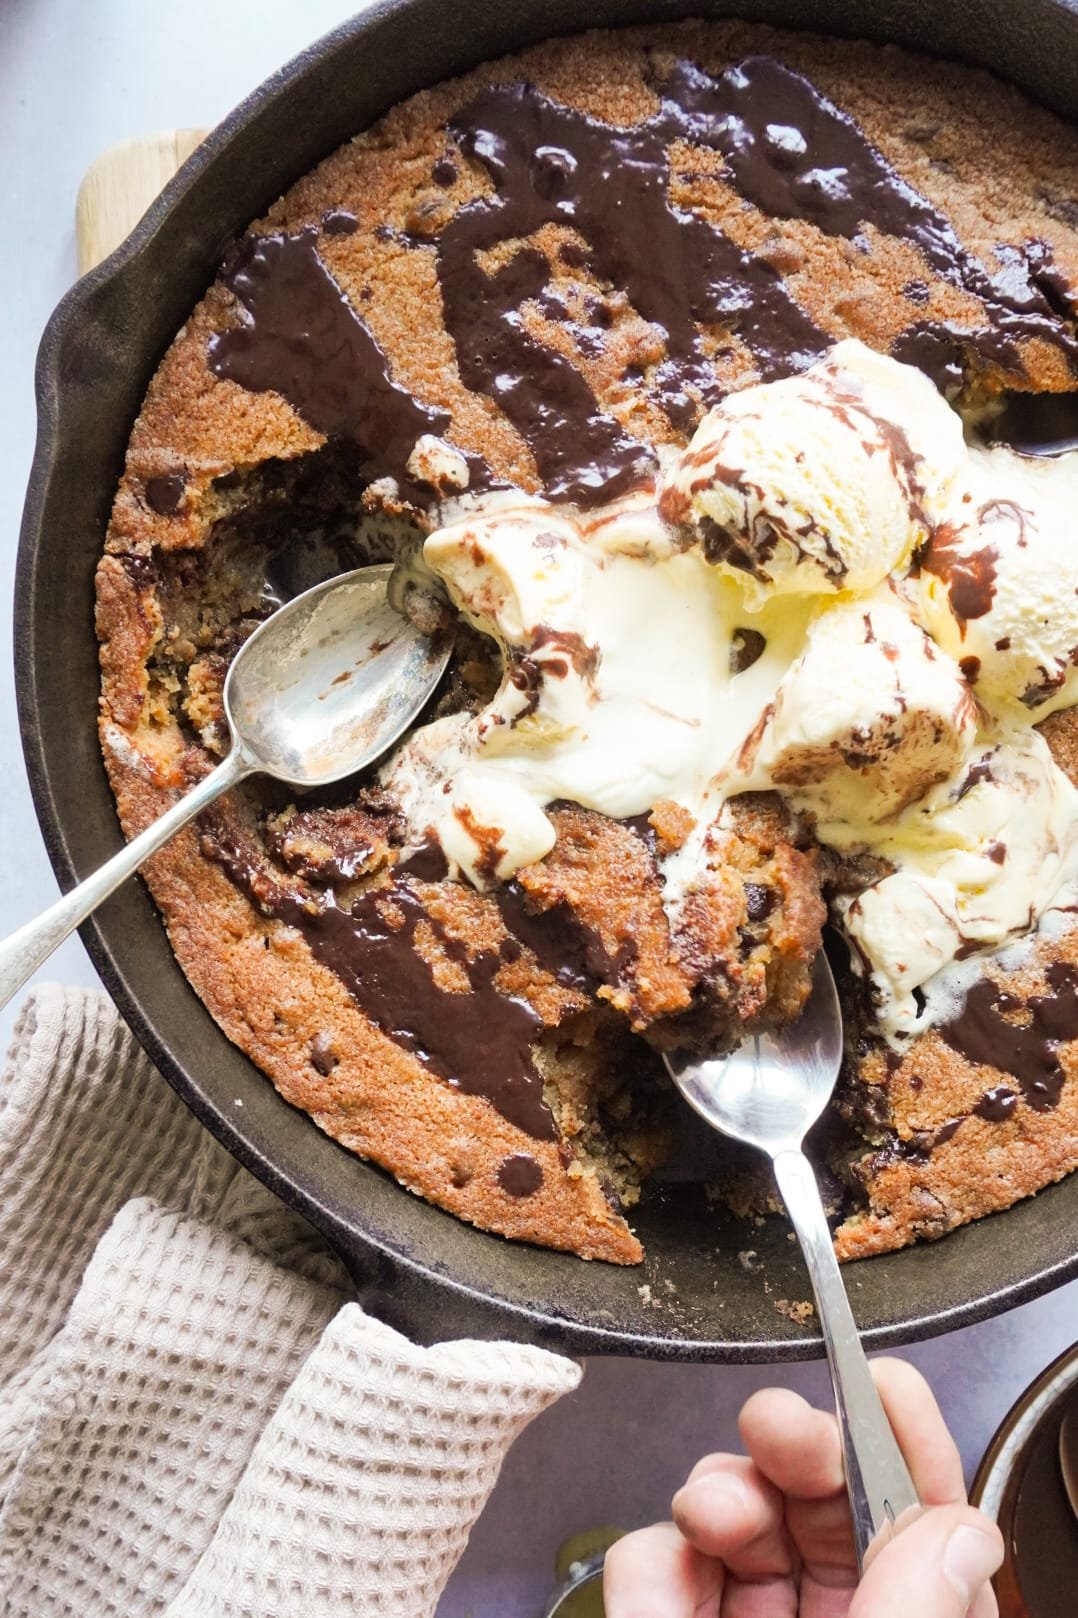 Pan chocolate chip cookie drizzled with chocolate sauce and a scoop of ice cream